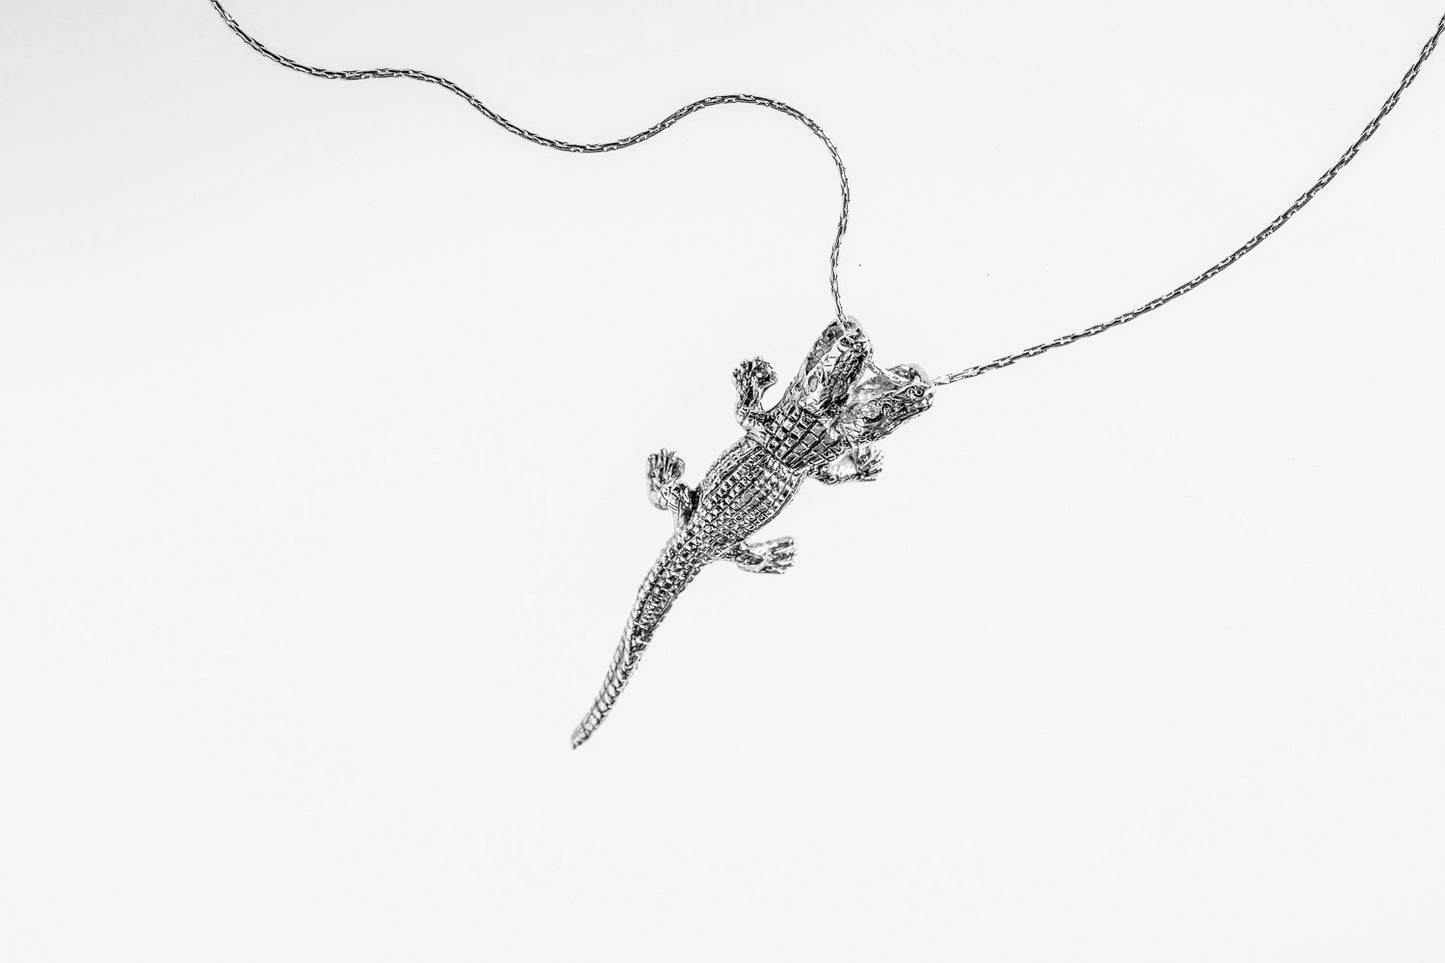 Two-Headed Alligator Necklace